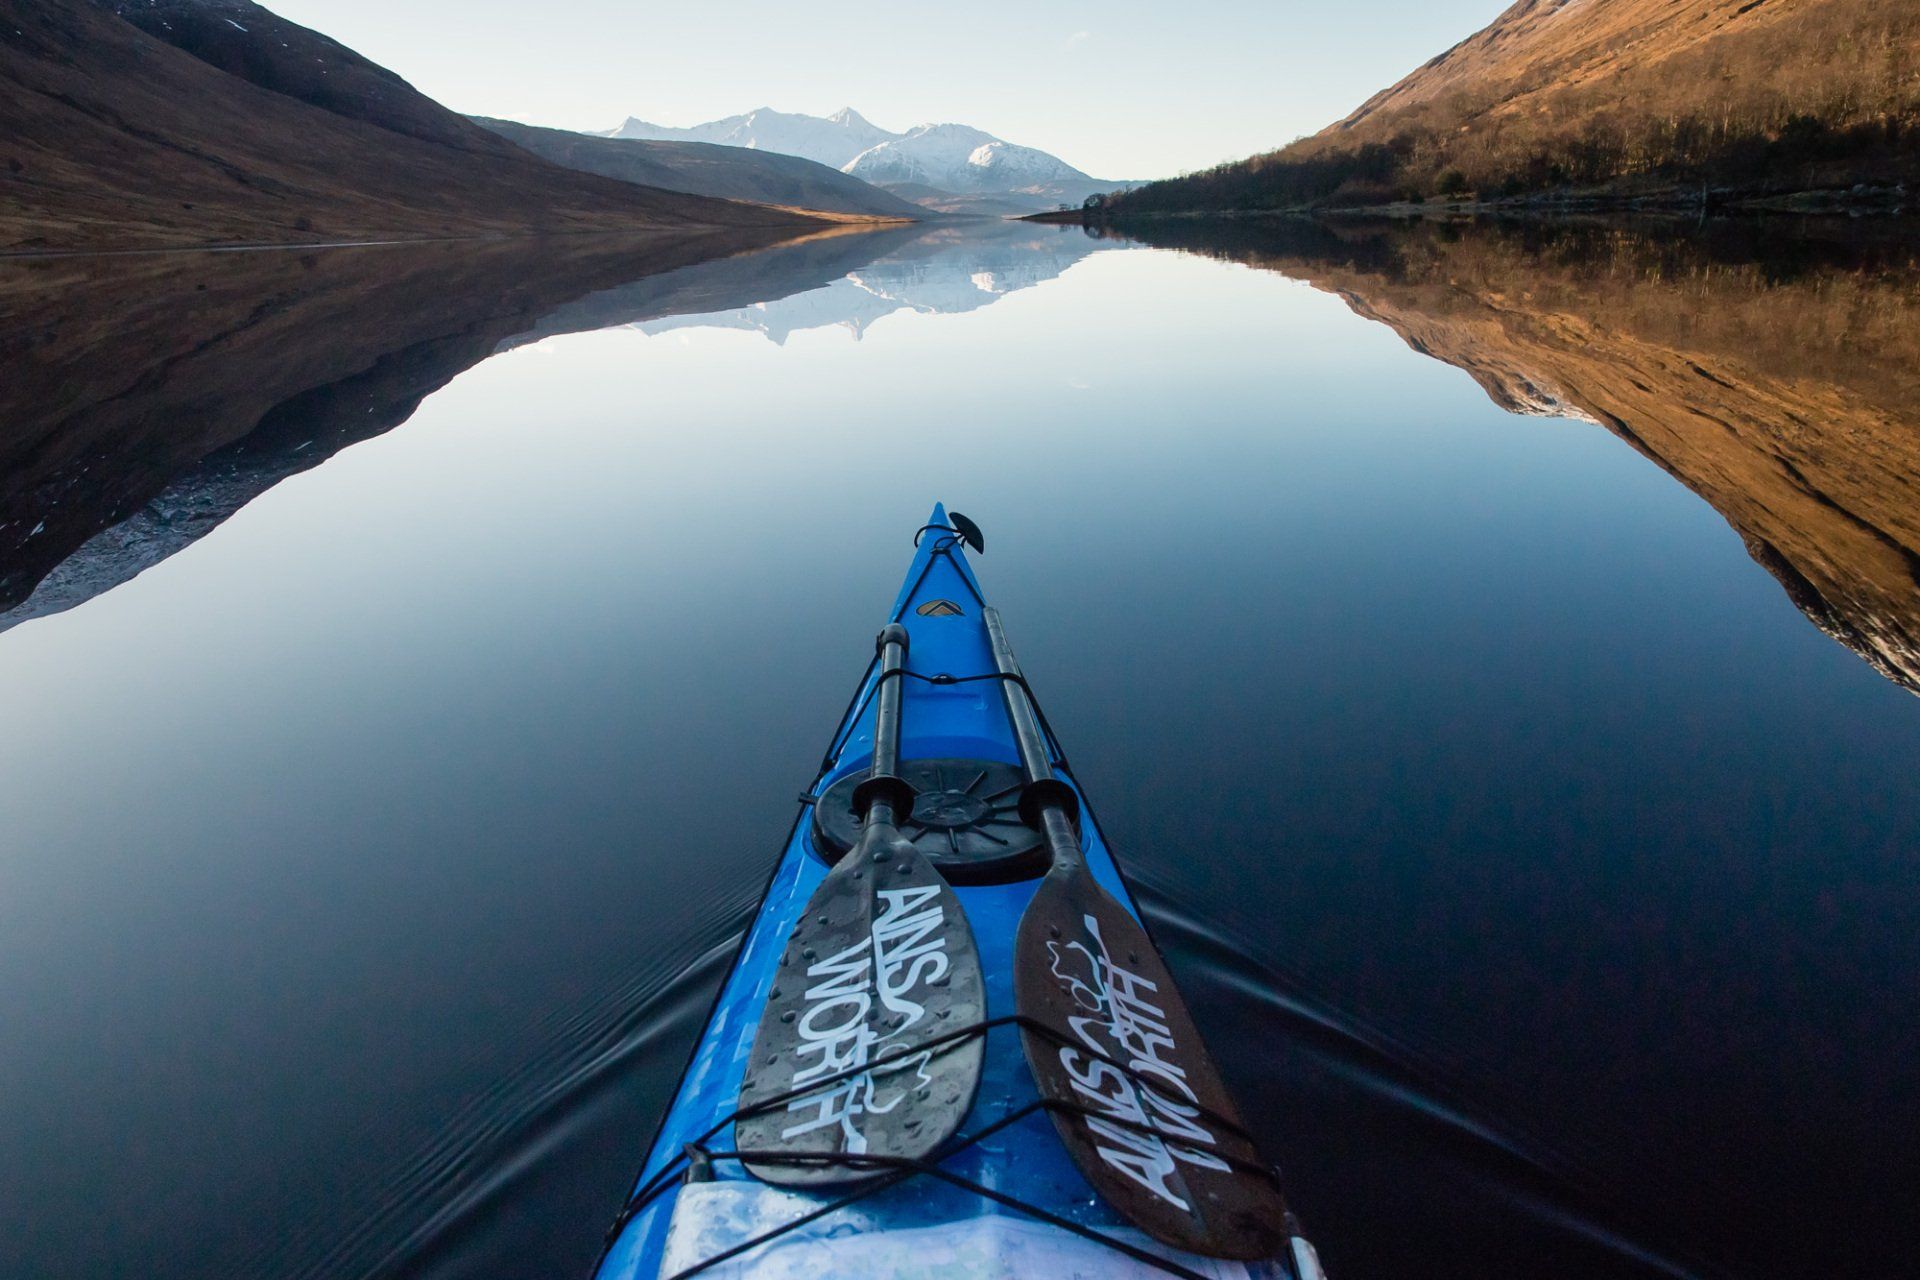 Give a paddler a gift which lasts for a full year